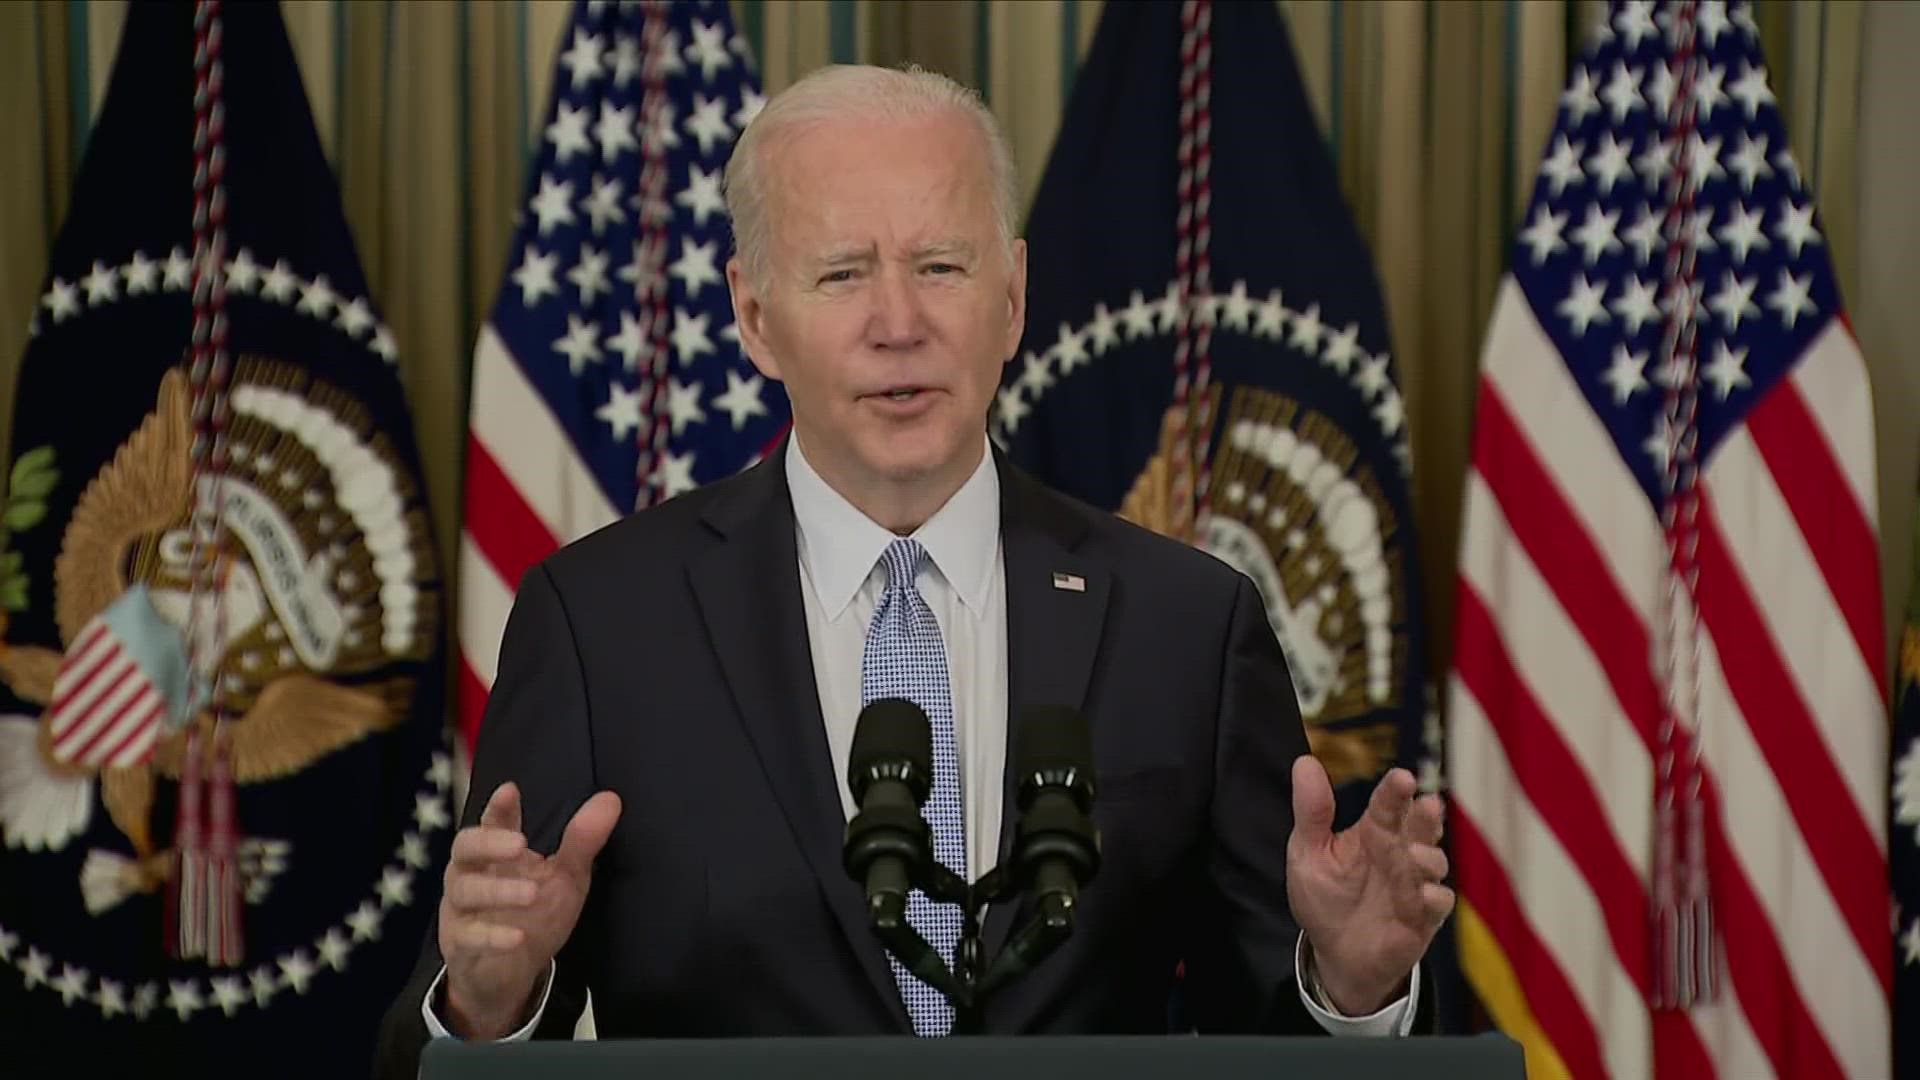 President Biden stated Friday that the March jobs report shows the American economy has gone from on the mend to on the move.